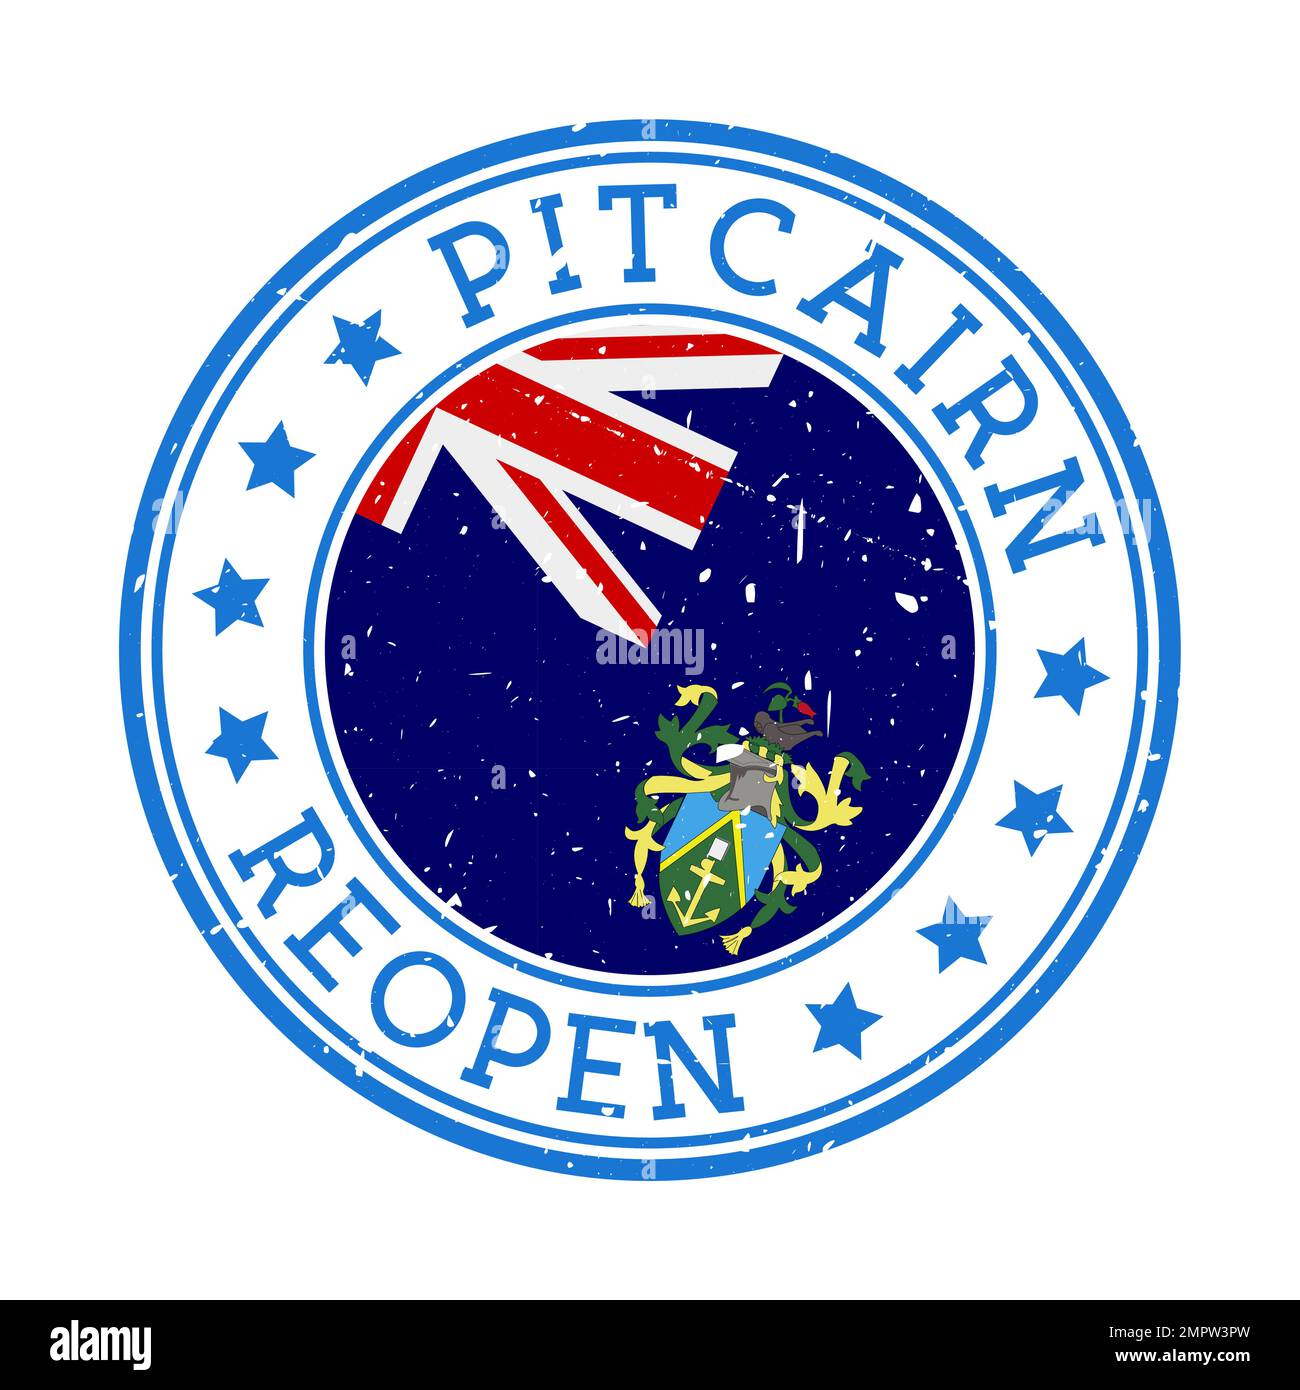 Pitcairn Reopening Stamp. Round badge of country with flag of Pitcairn. Reopening after lock-down sign. Vector illustration. Stock Vector